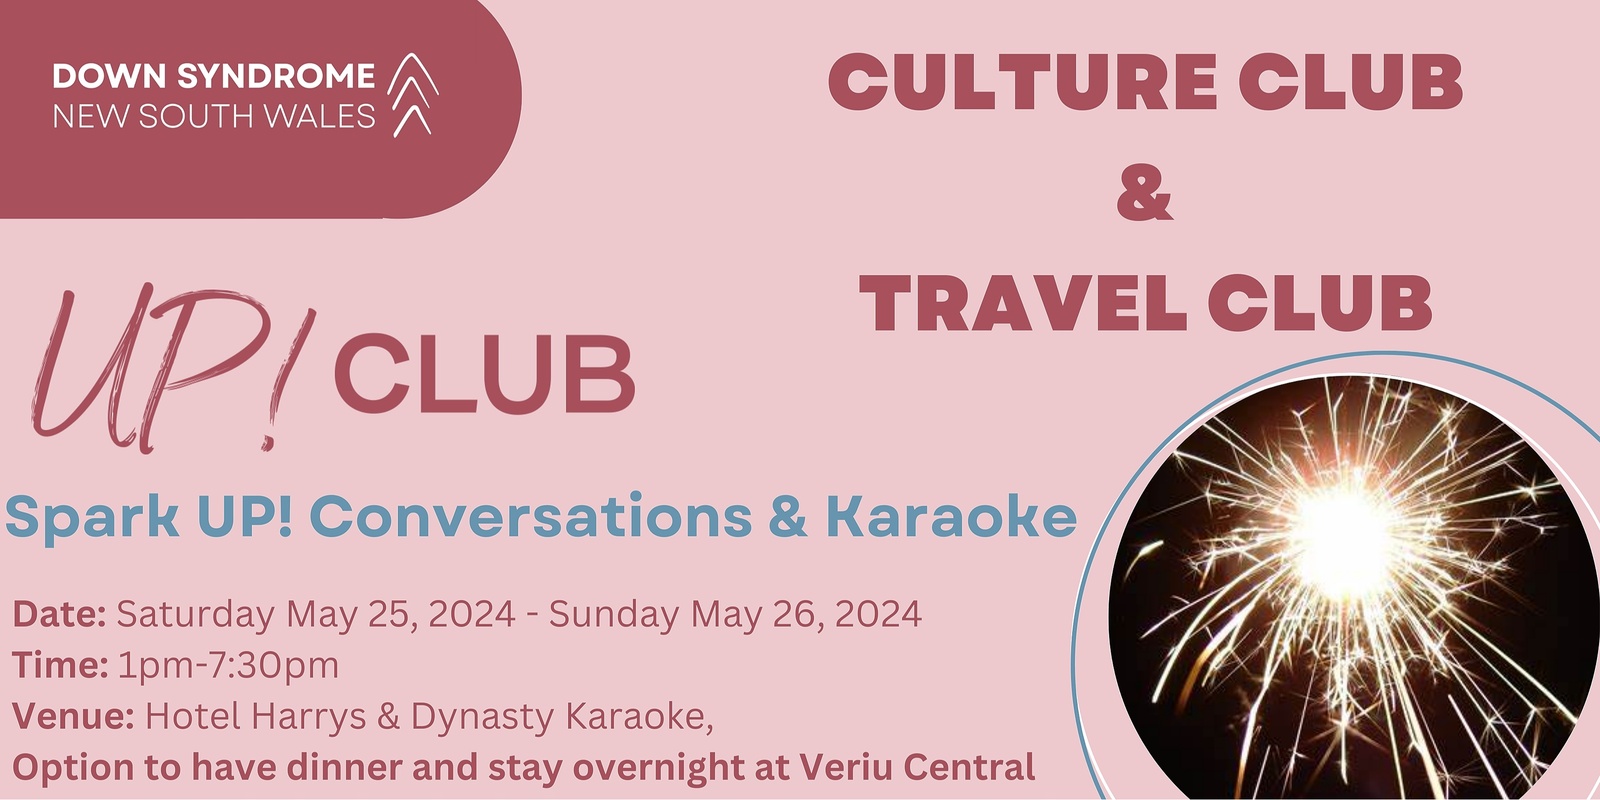 Banner image for UP! Club Culture Club: Spark UP! Conversations & Karaoke